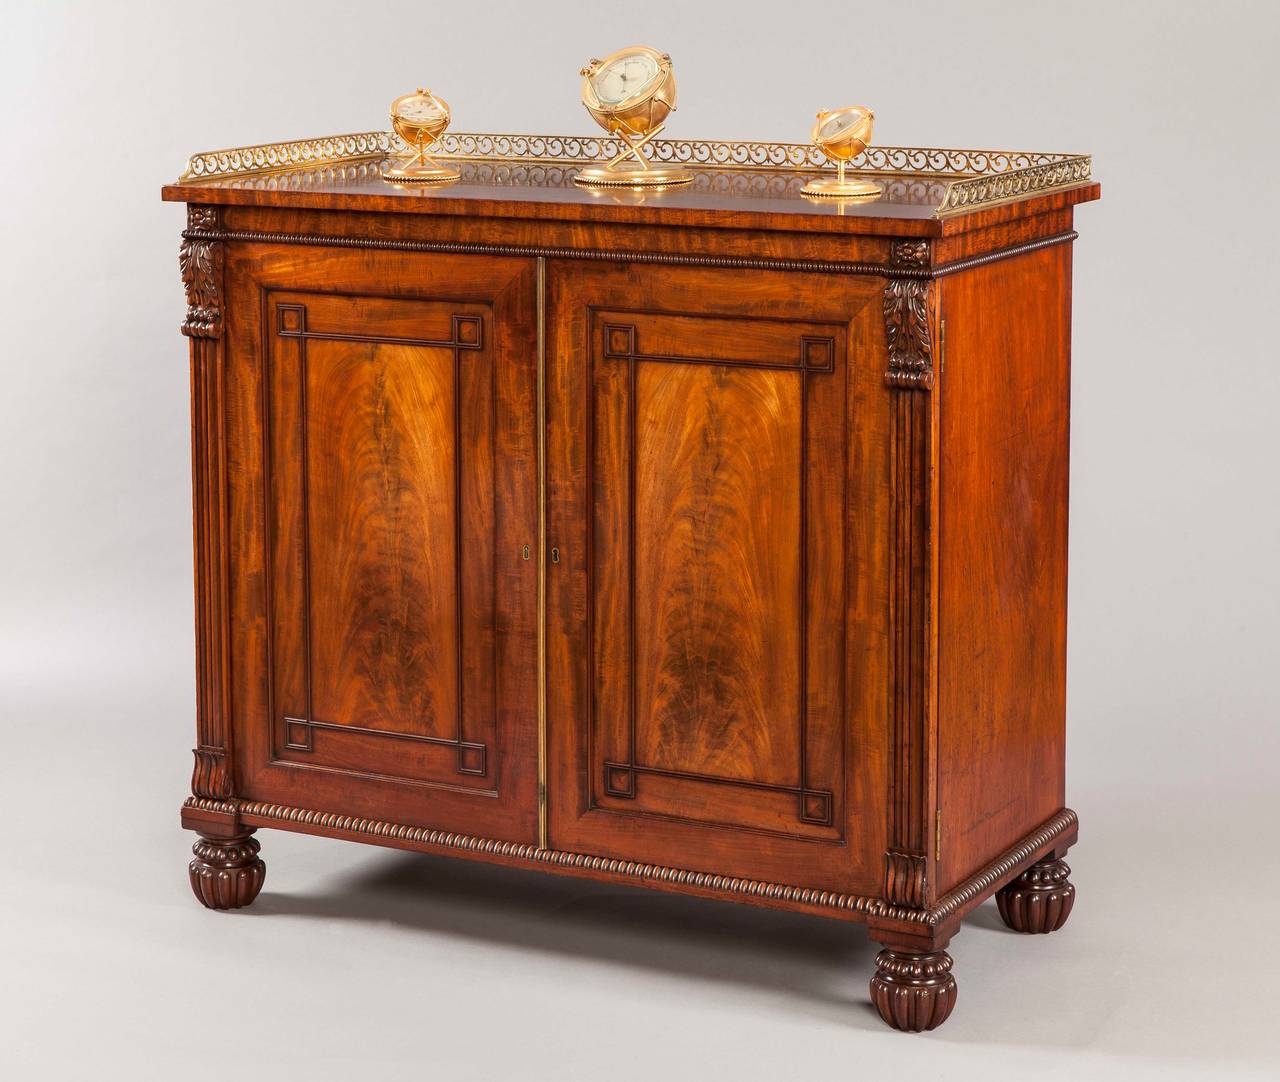 A late Georgian side cabinet firmly attributed to Gillows of Lancaster

Constructed in a finely grained Cuban mahogany; rising from ring turned and lobed oblate bun feet: over, housed between two stiles having stylized carved lotus leaf bases and